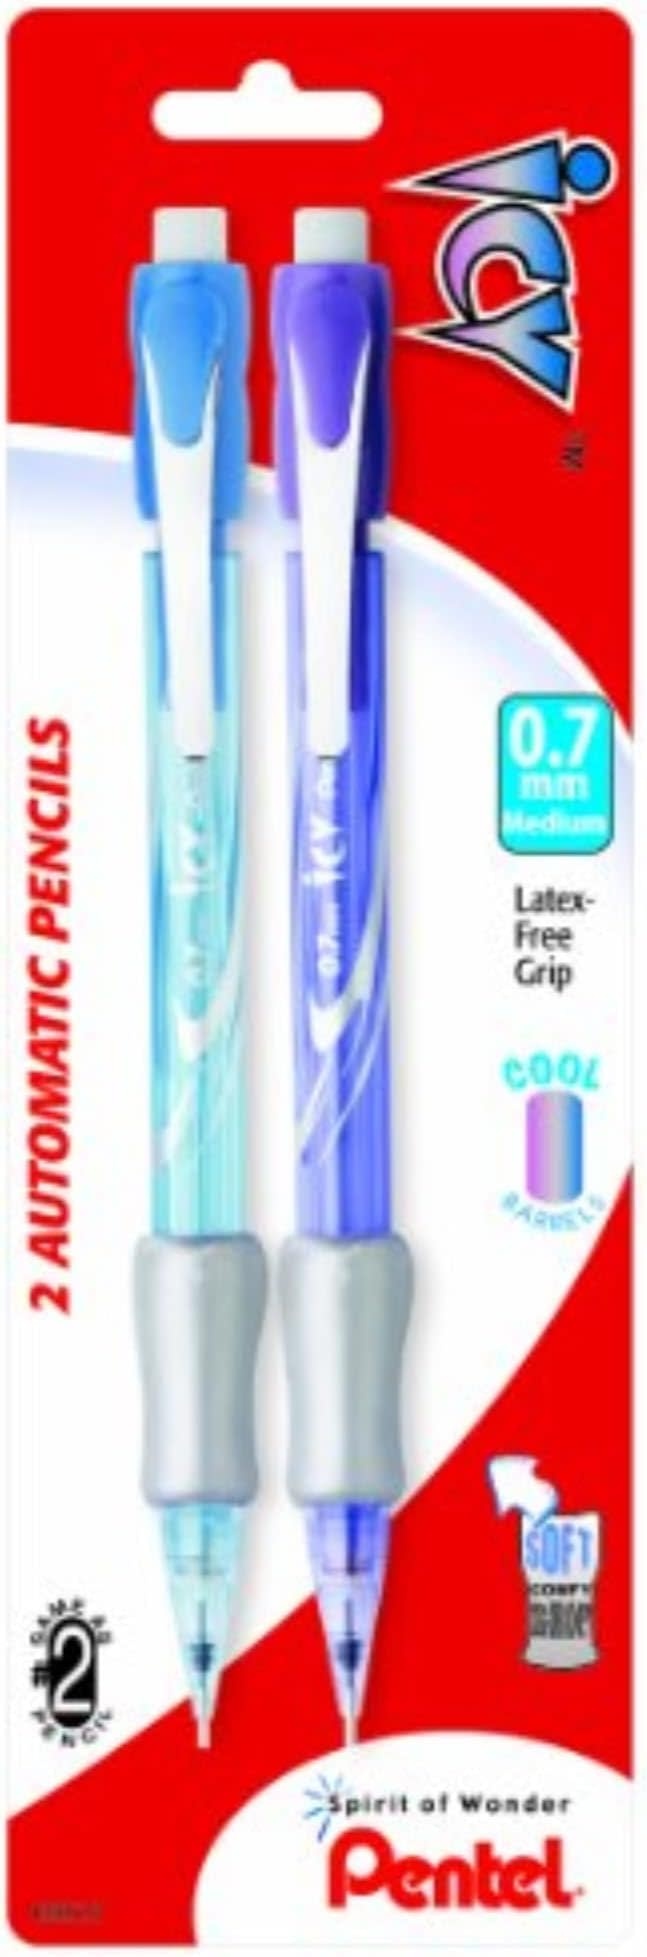 Pentel Icy Automatic Pencil, 0.7mm